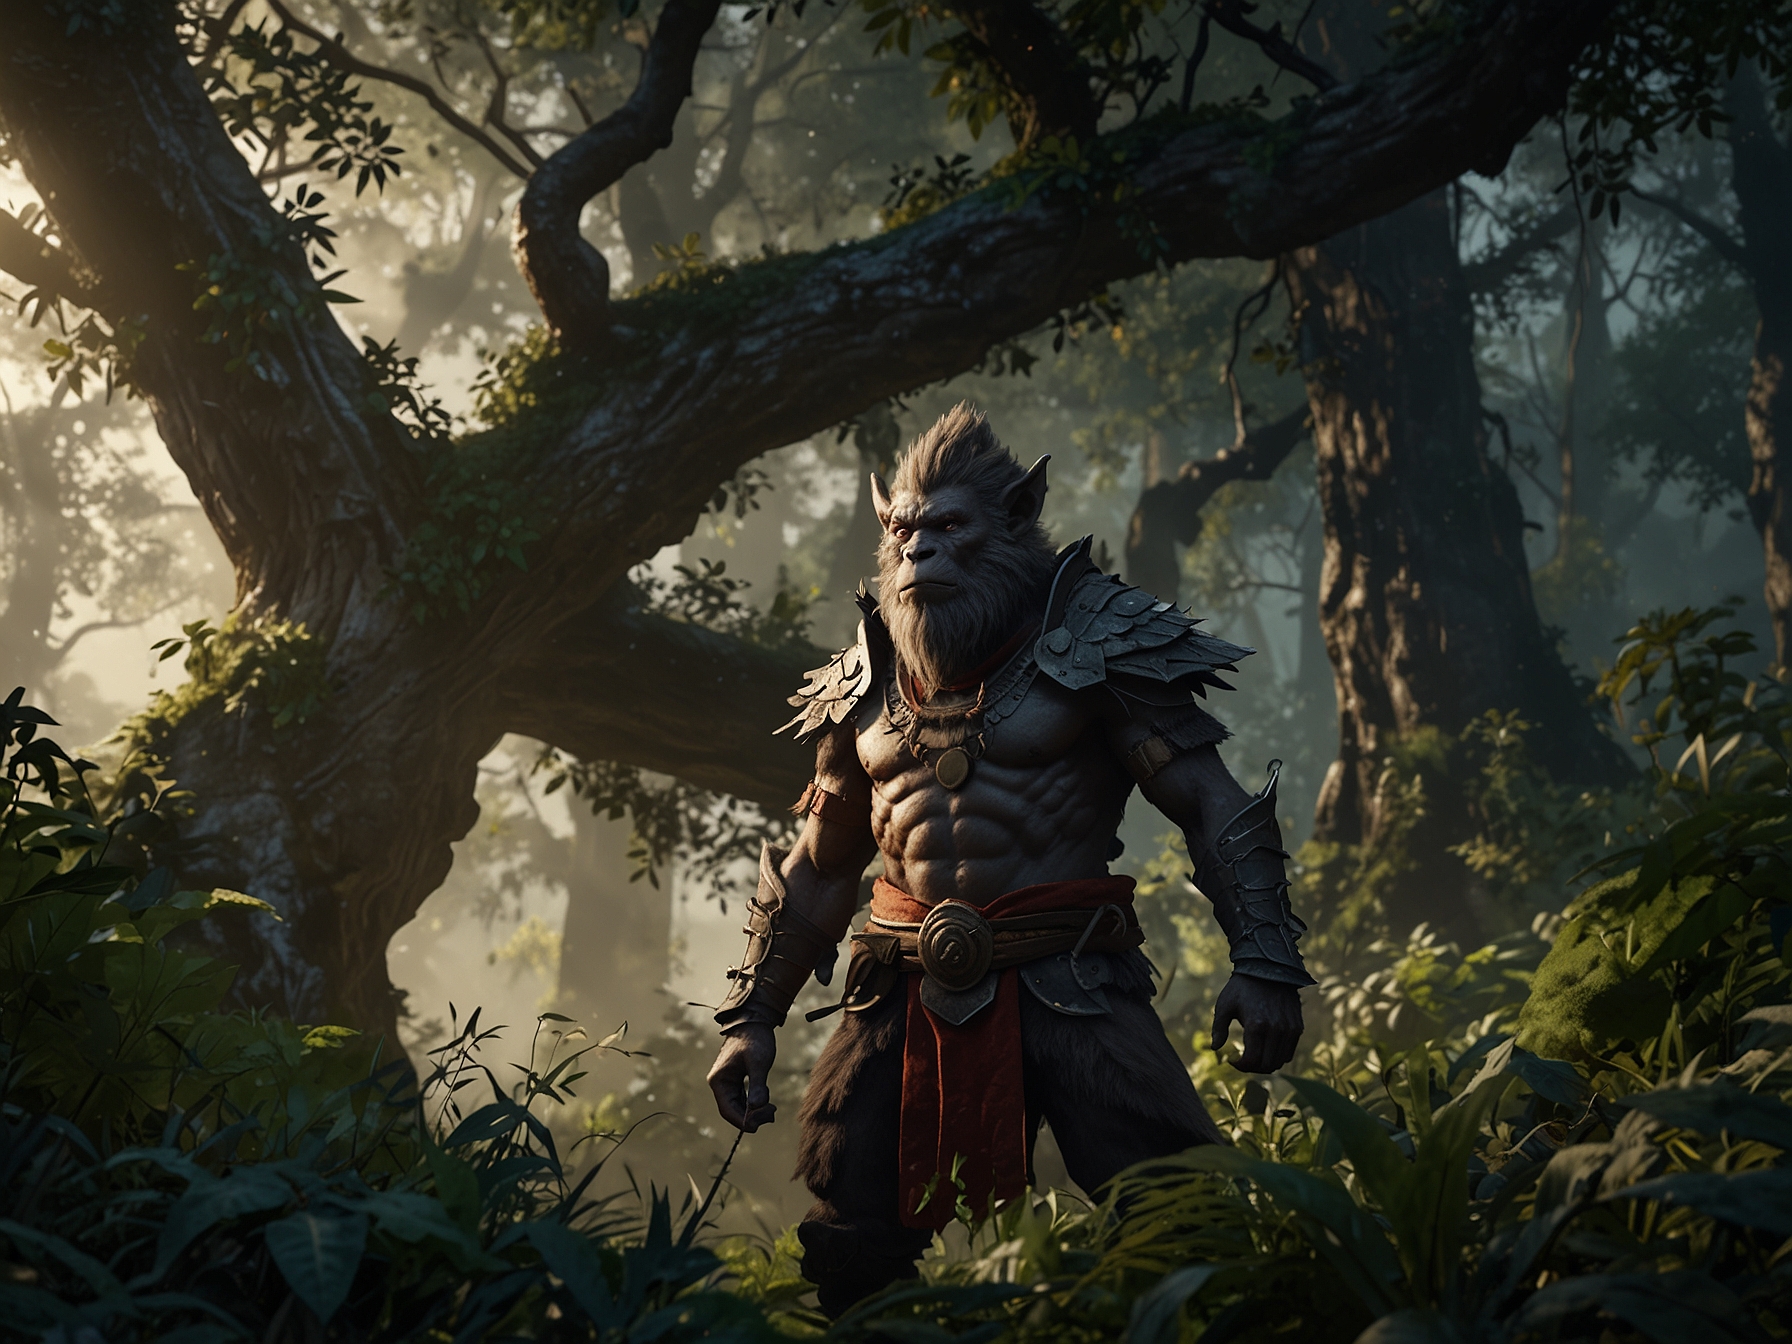 A stunning in-game scene from Black Myth: Wukong showcasing the lush forest environment and detailed character models.